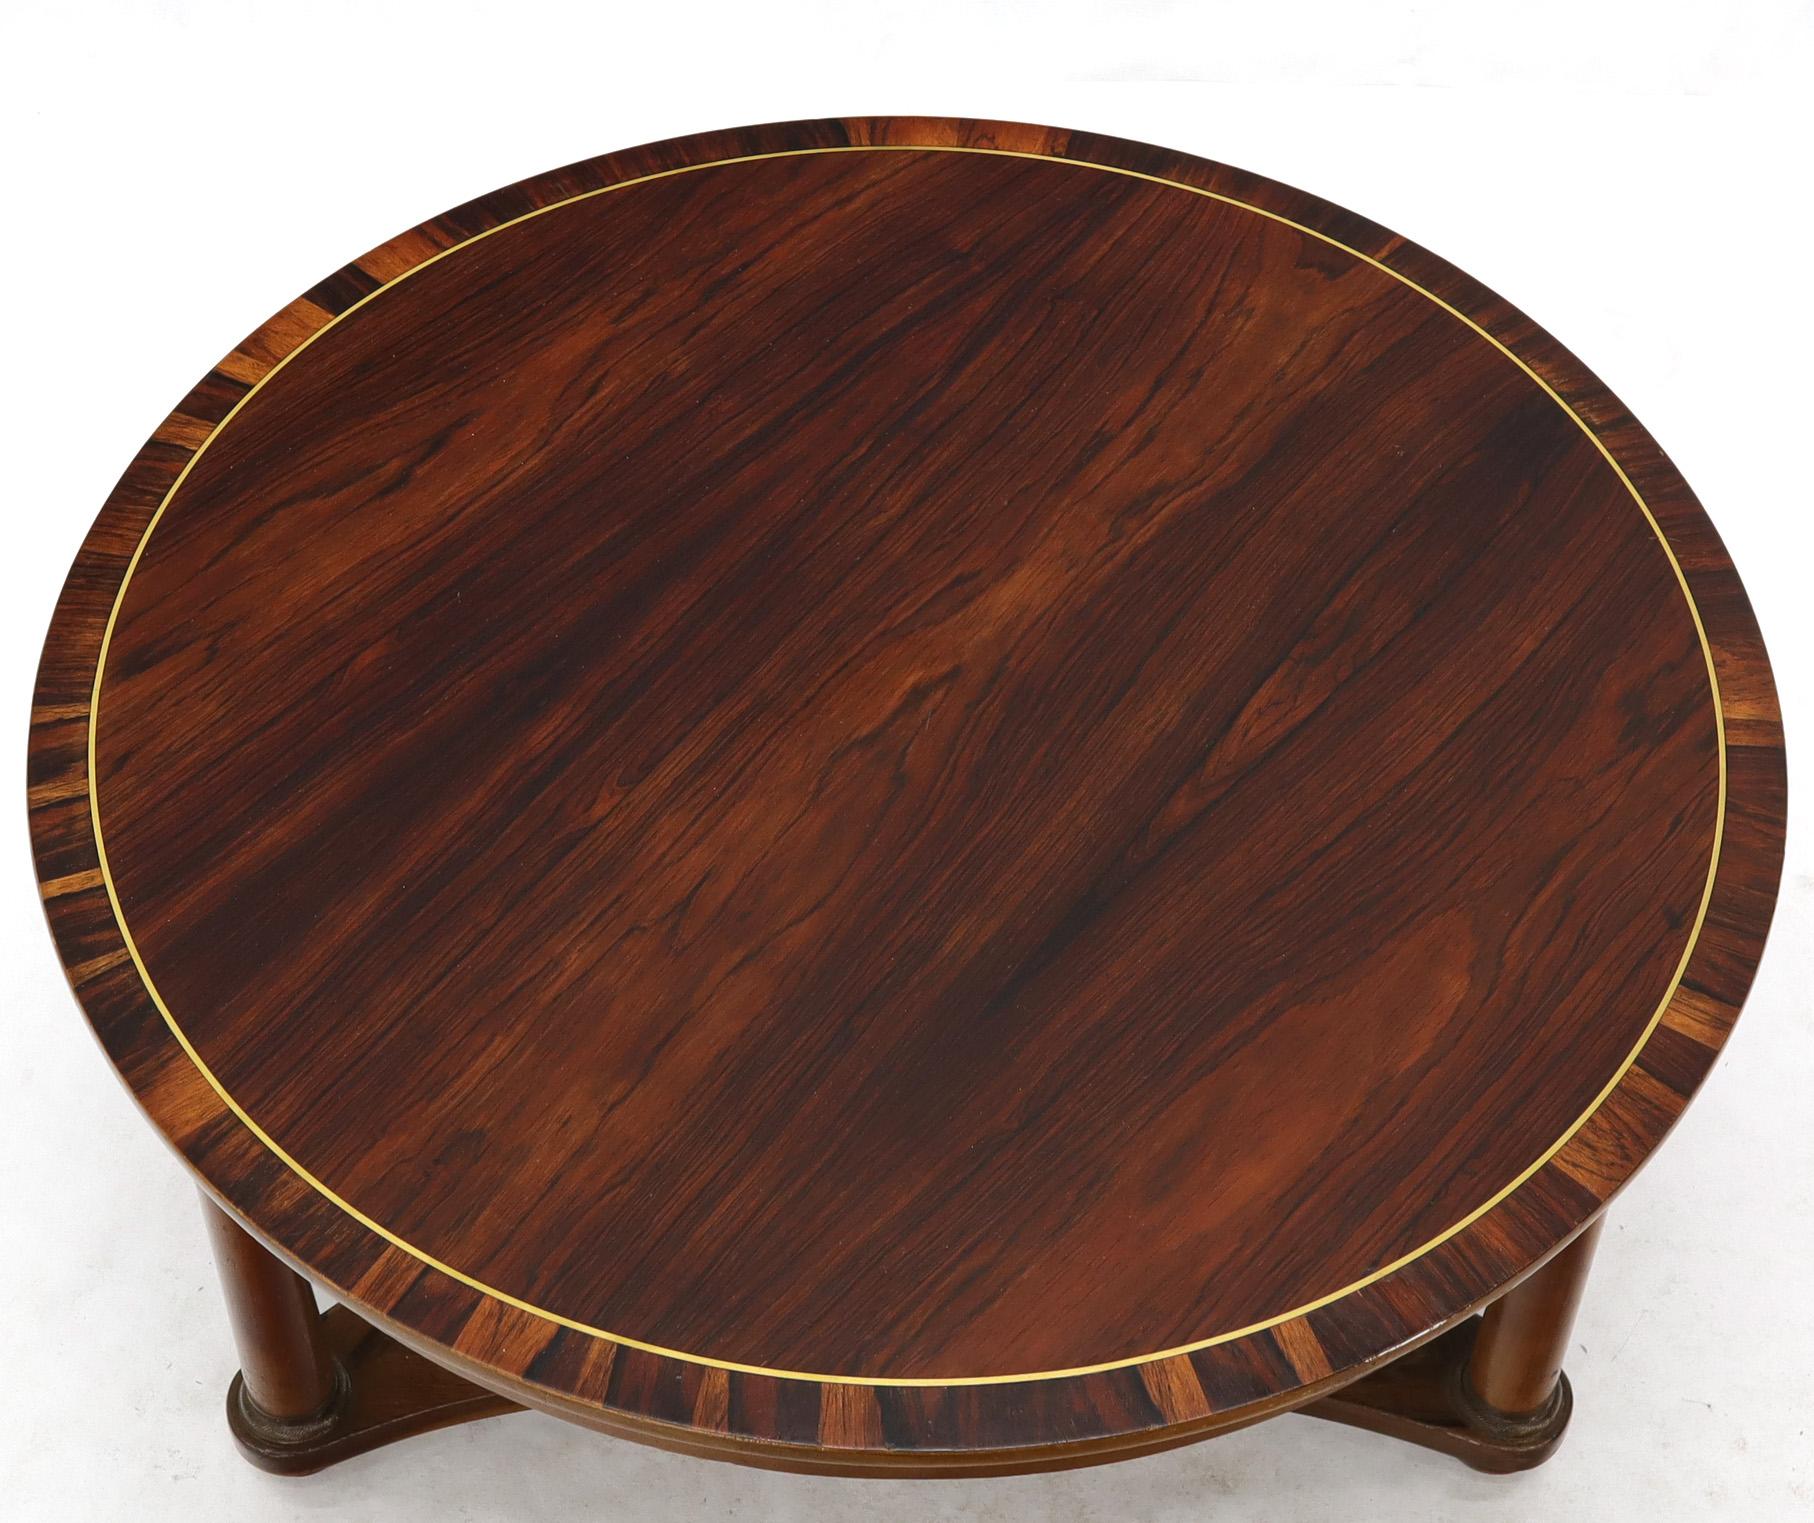 Round Rosewood Neoclassical Rosewood Banded Top Coffee Center Table In Good Condition For Sale In Rockaway, NJ